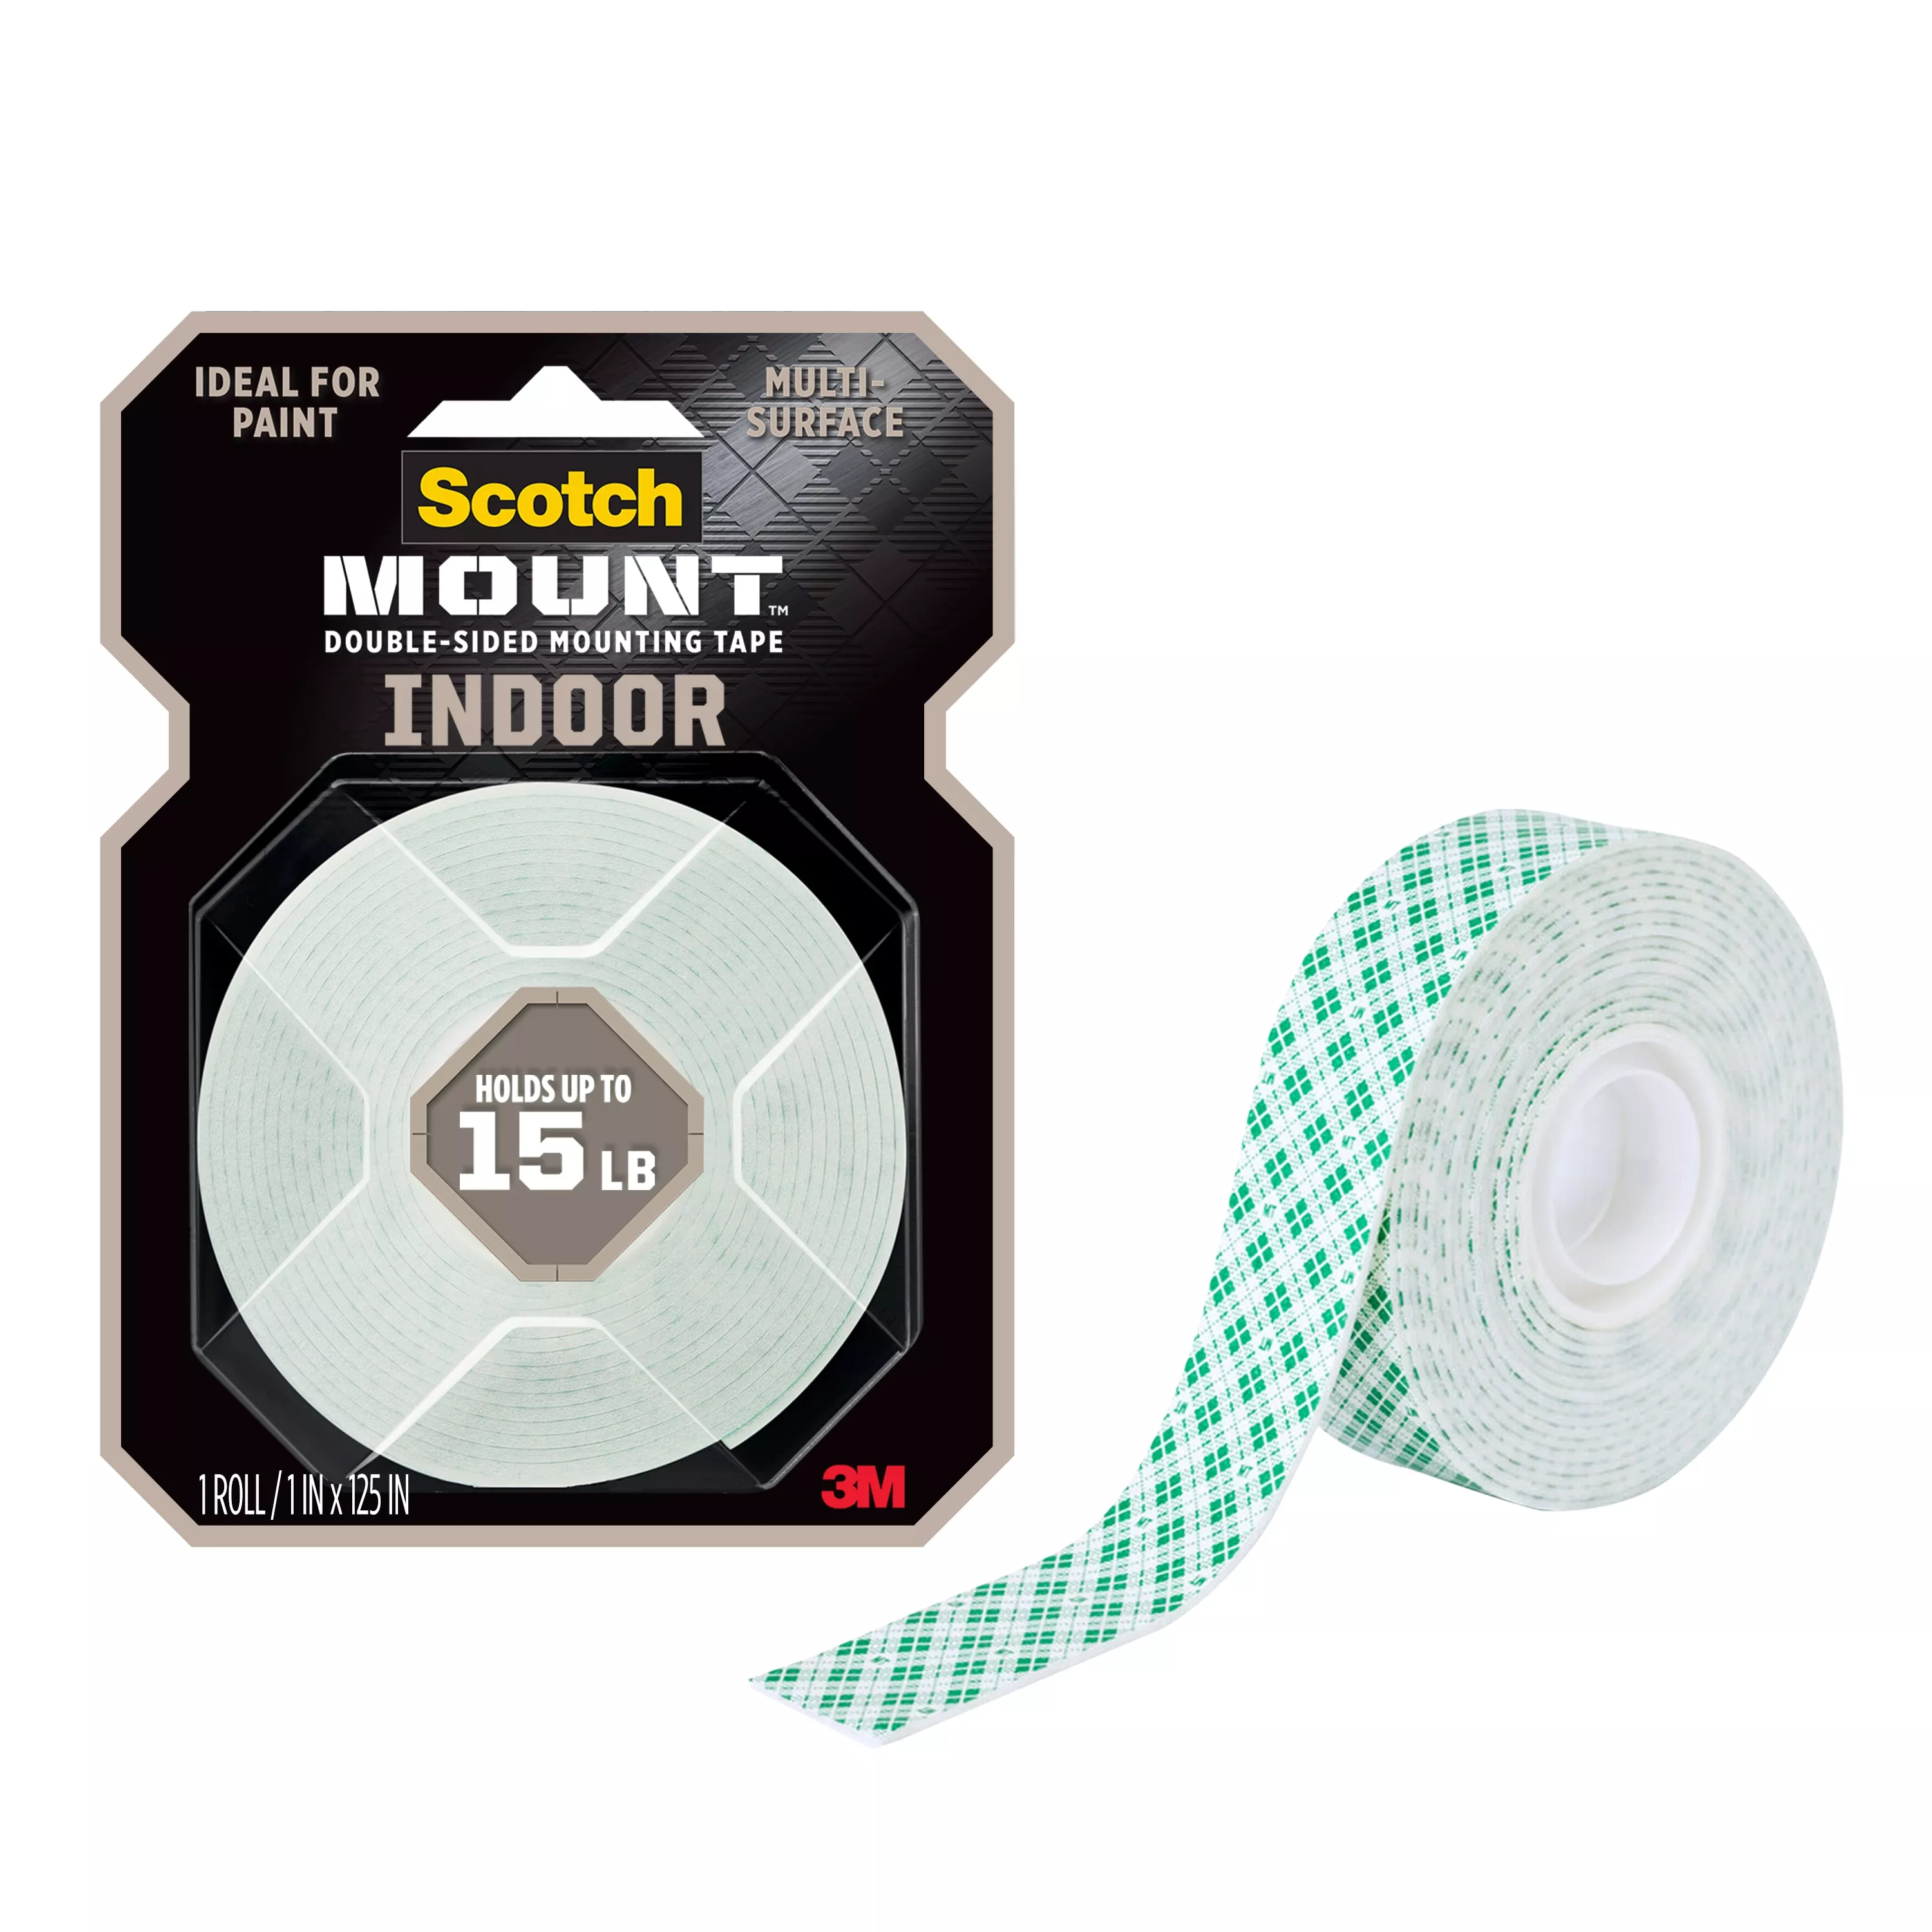 Scotch-Mount™ Indoor Double-Sided Mounting Tape 314H-MED-DC, 1 in x 125 in (2,54 cm x 3,17 m)